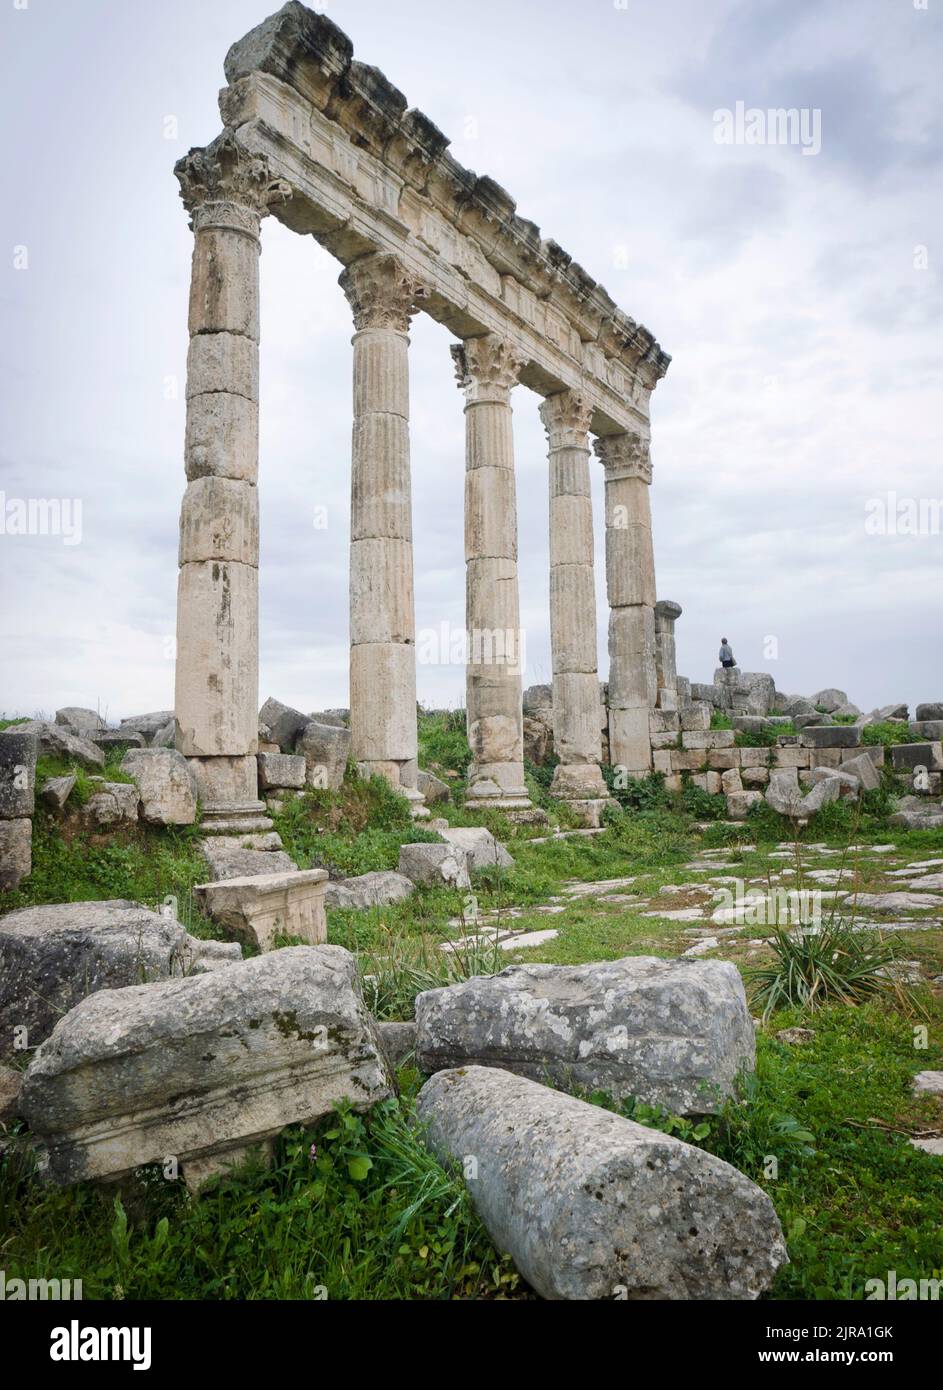 The Great Colonnade at Apamea ruins, Hama Governorate, Syria Stock Photo